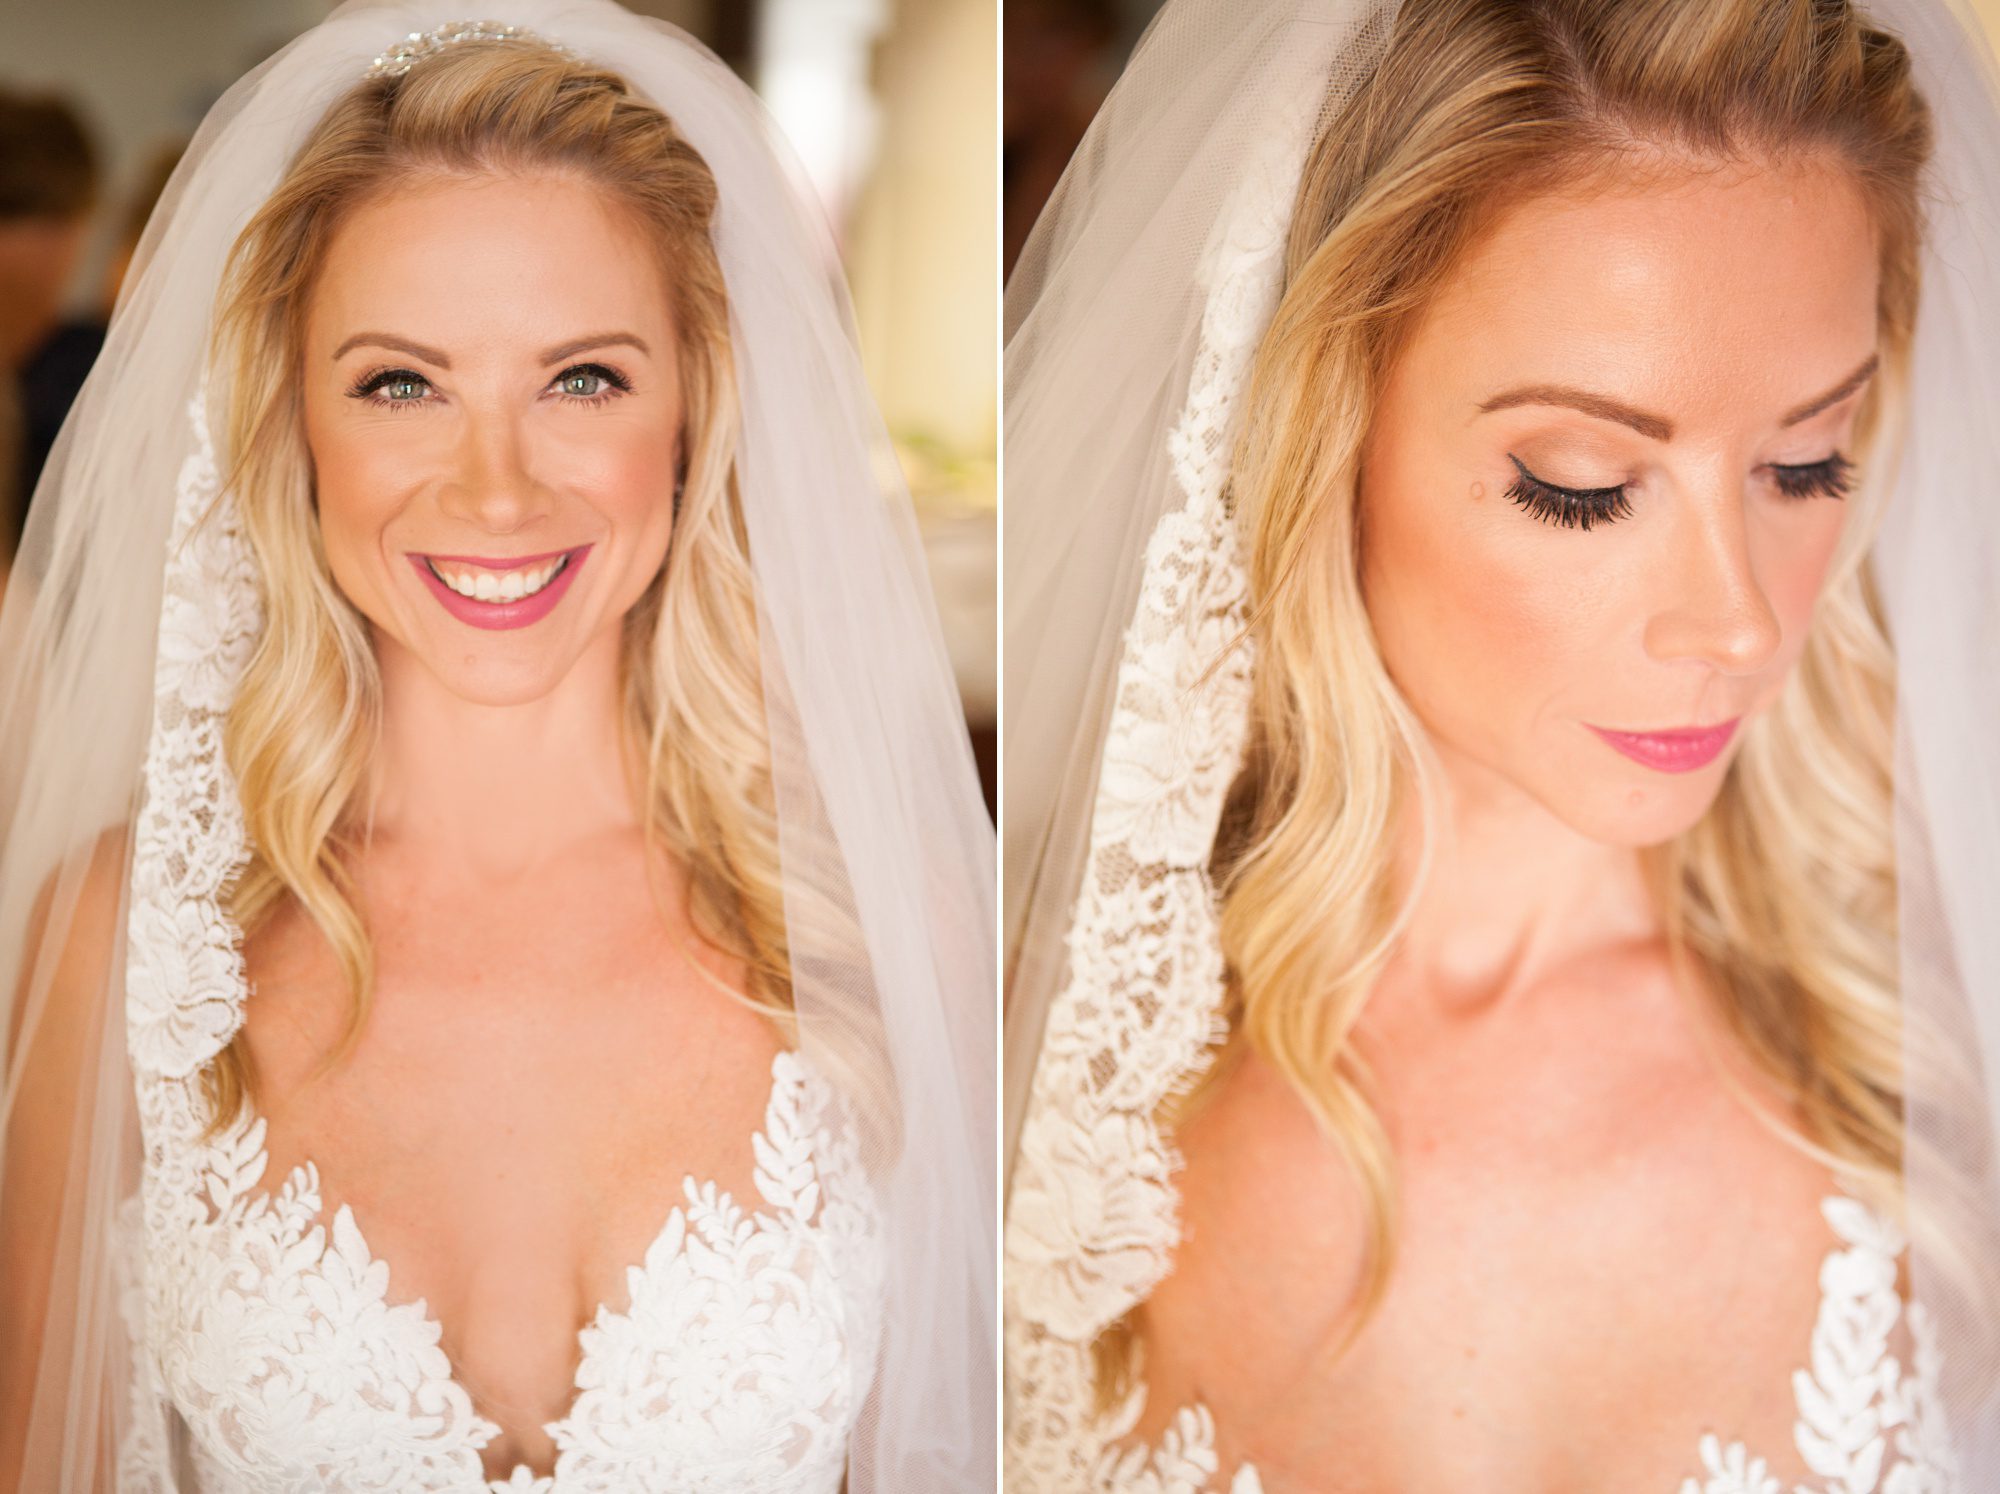 Bridal portrait after makeup at Courtyard Marriott Downtown Nashville before wedding ceremony and reception at City Club Nashville. Photos by Krista Lee Photography. 